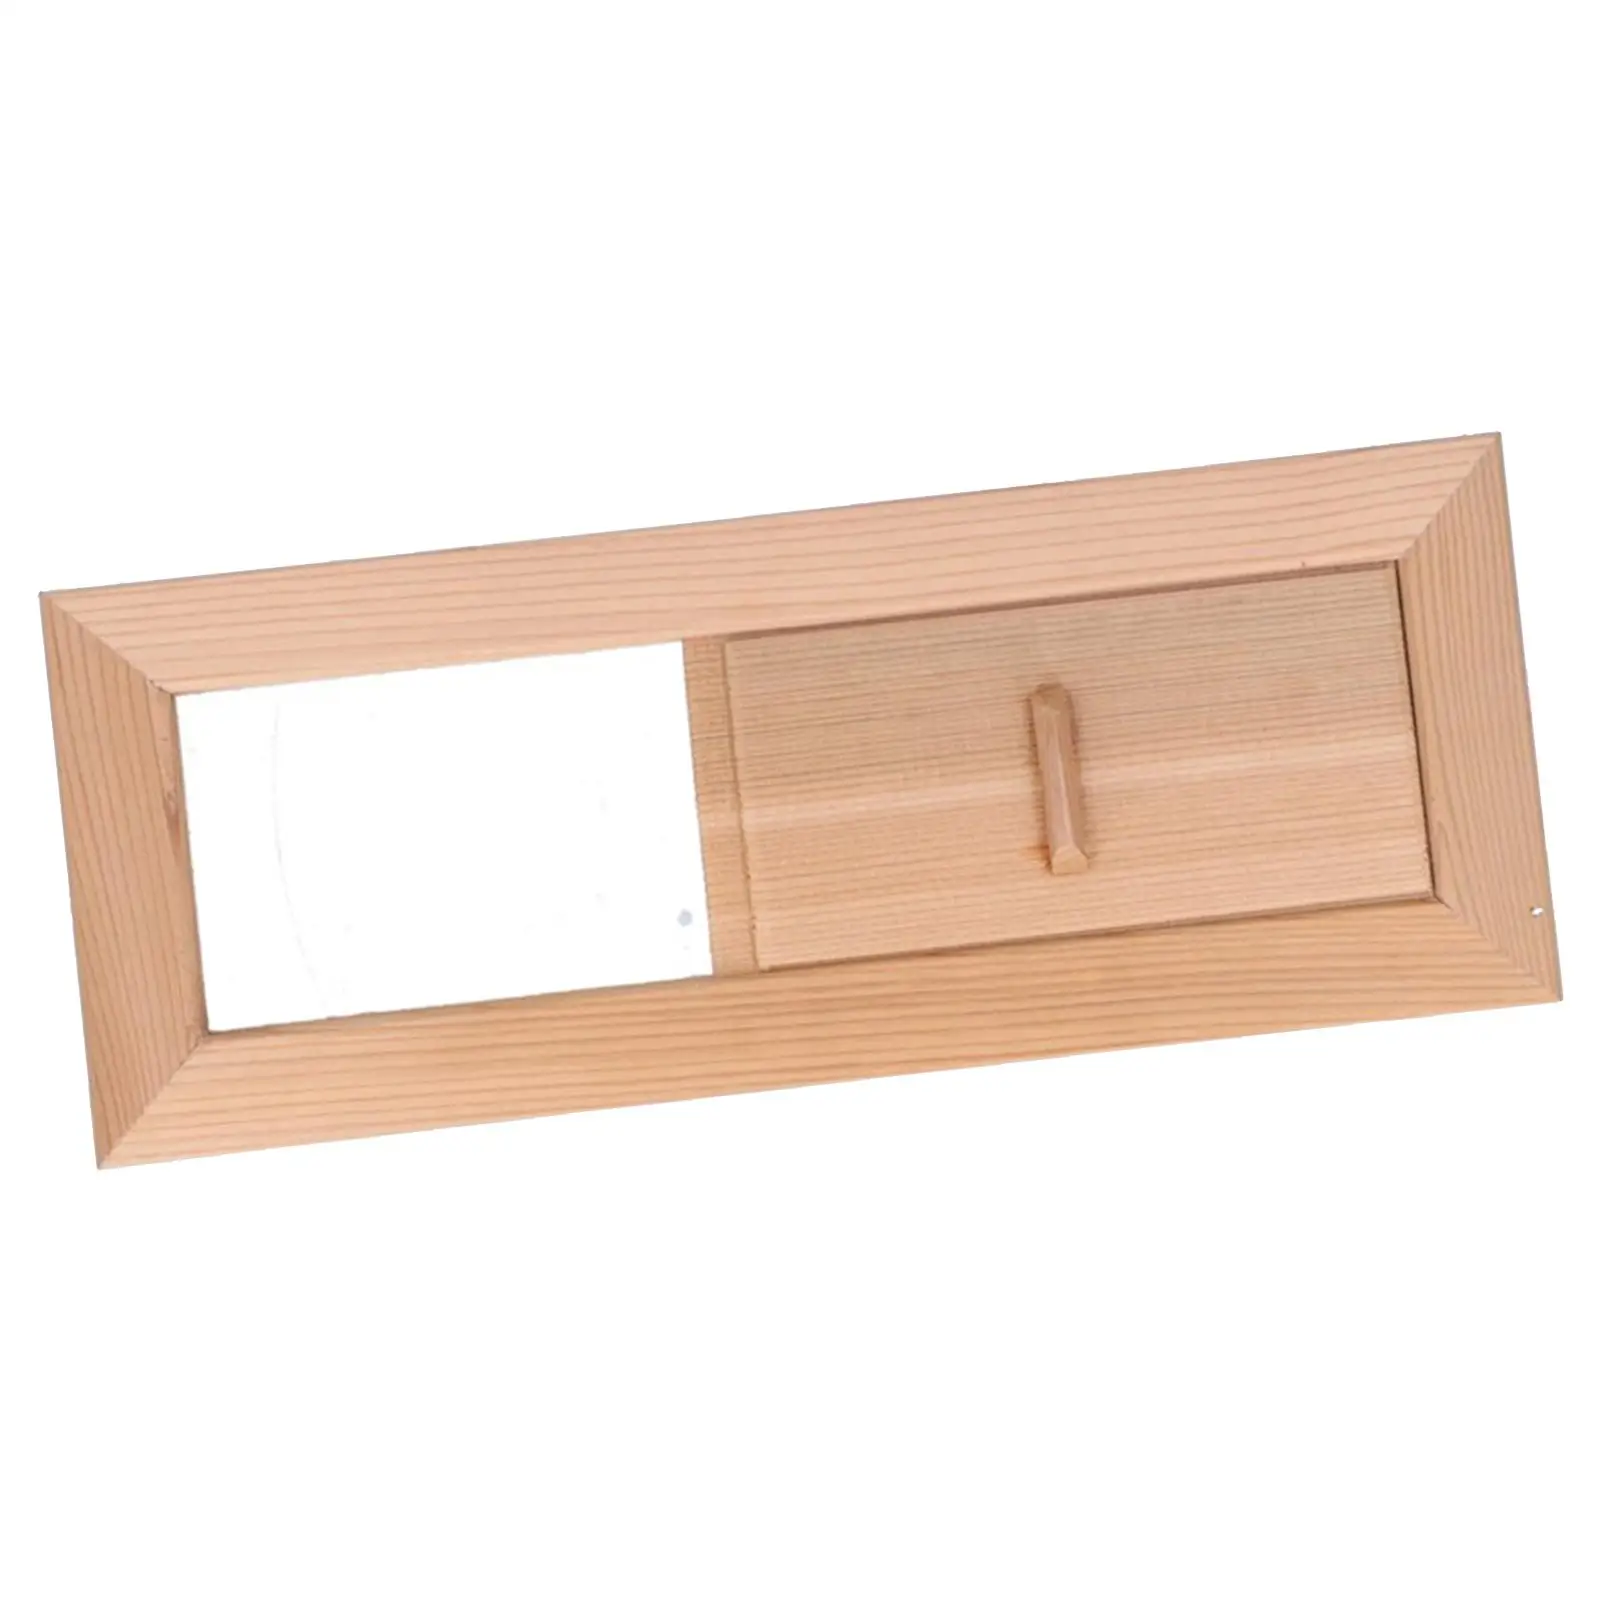 Wooden Rectangle Air Vent Adjustable Sauna Air Vent Ventilation Panel Grille for Sauna Room Steam Room Accessories